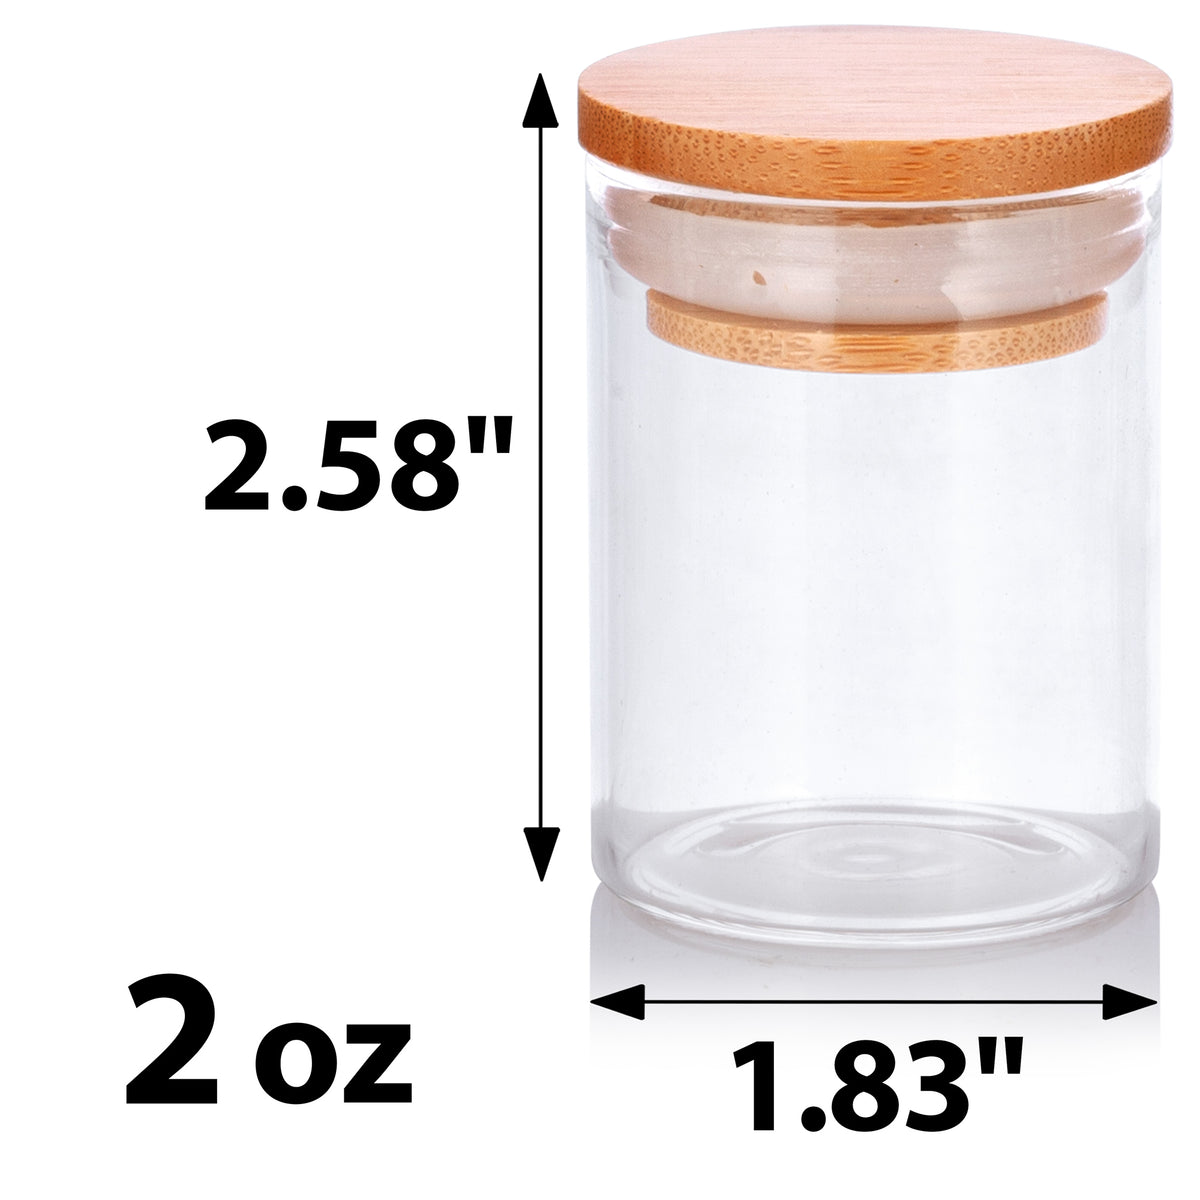 3258-Glass Jar with Bamboo Wood Cover, Small 4.25 H x